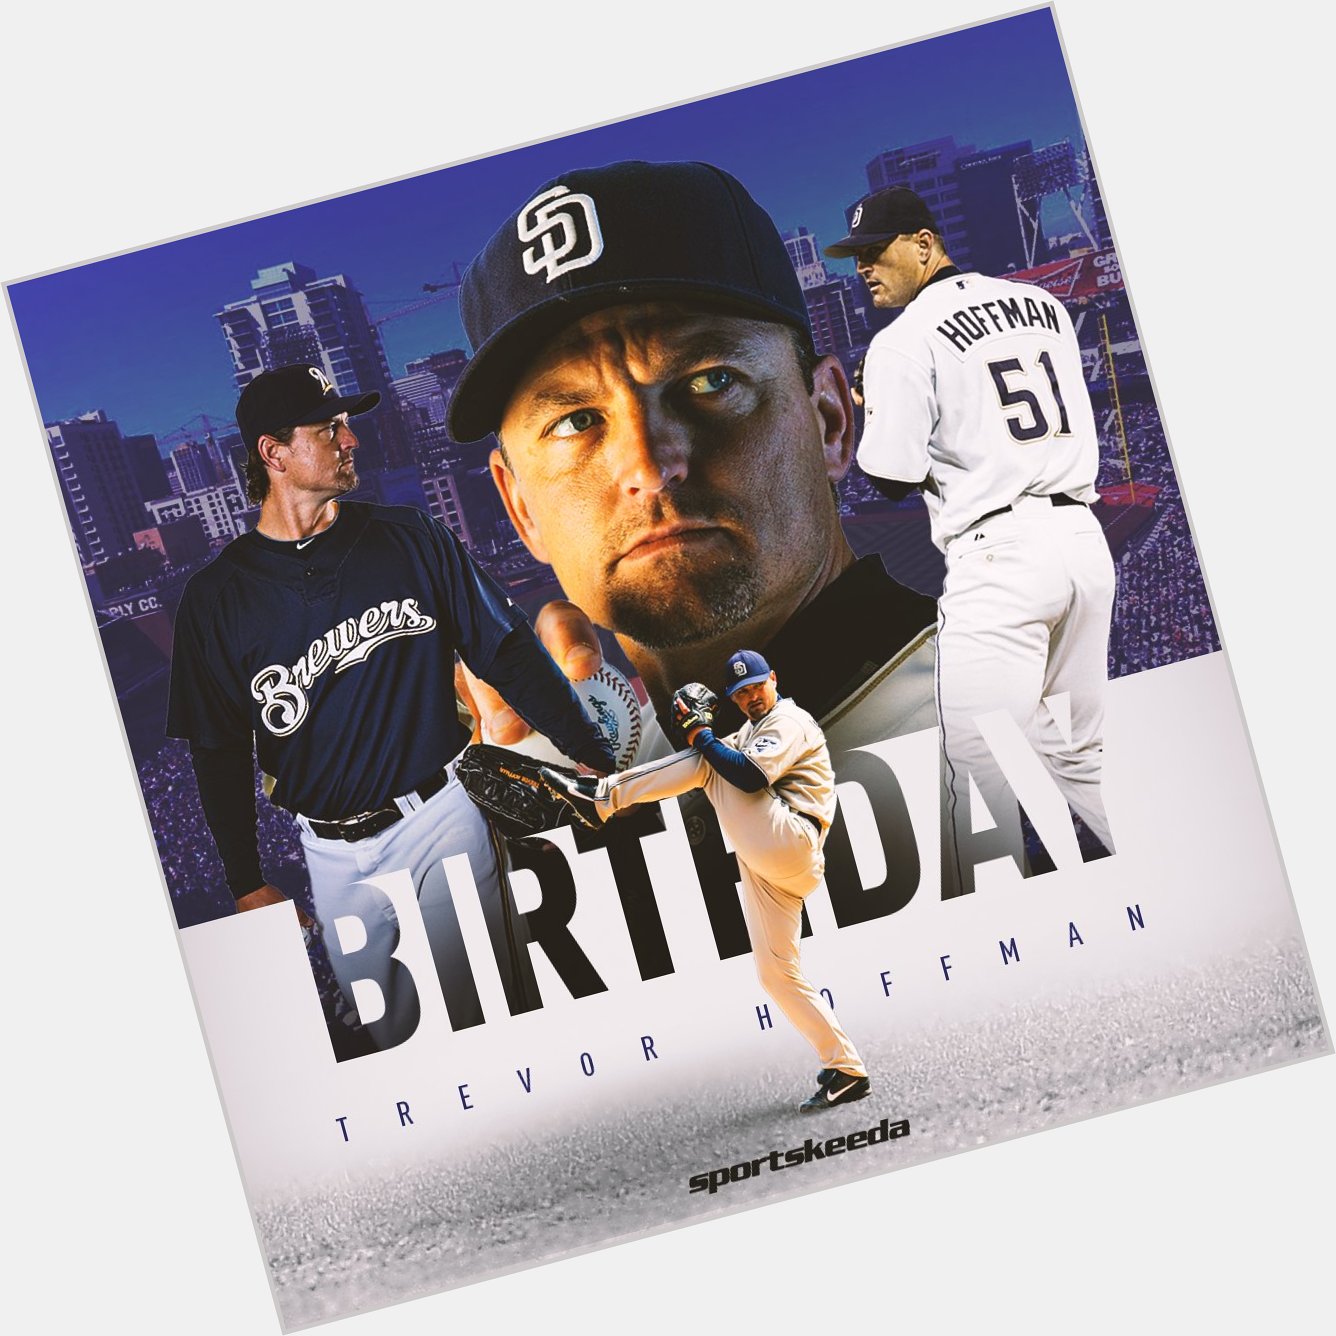 Happy Birthday to former San Diego Padres pitcher Trevor Hoffman     Hall of Famer 7x All-Star 2x Rolaids Relief 